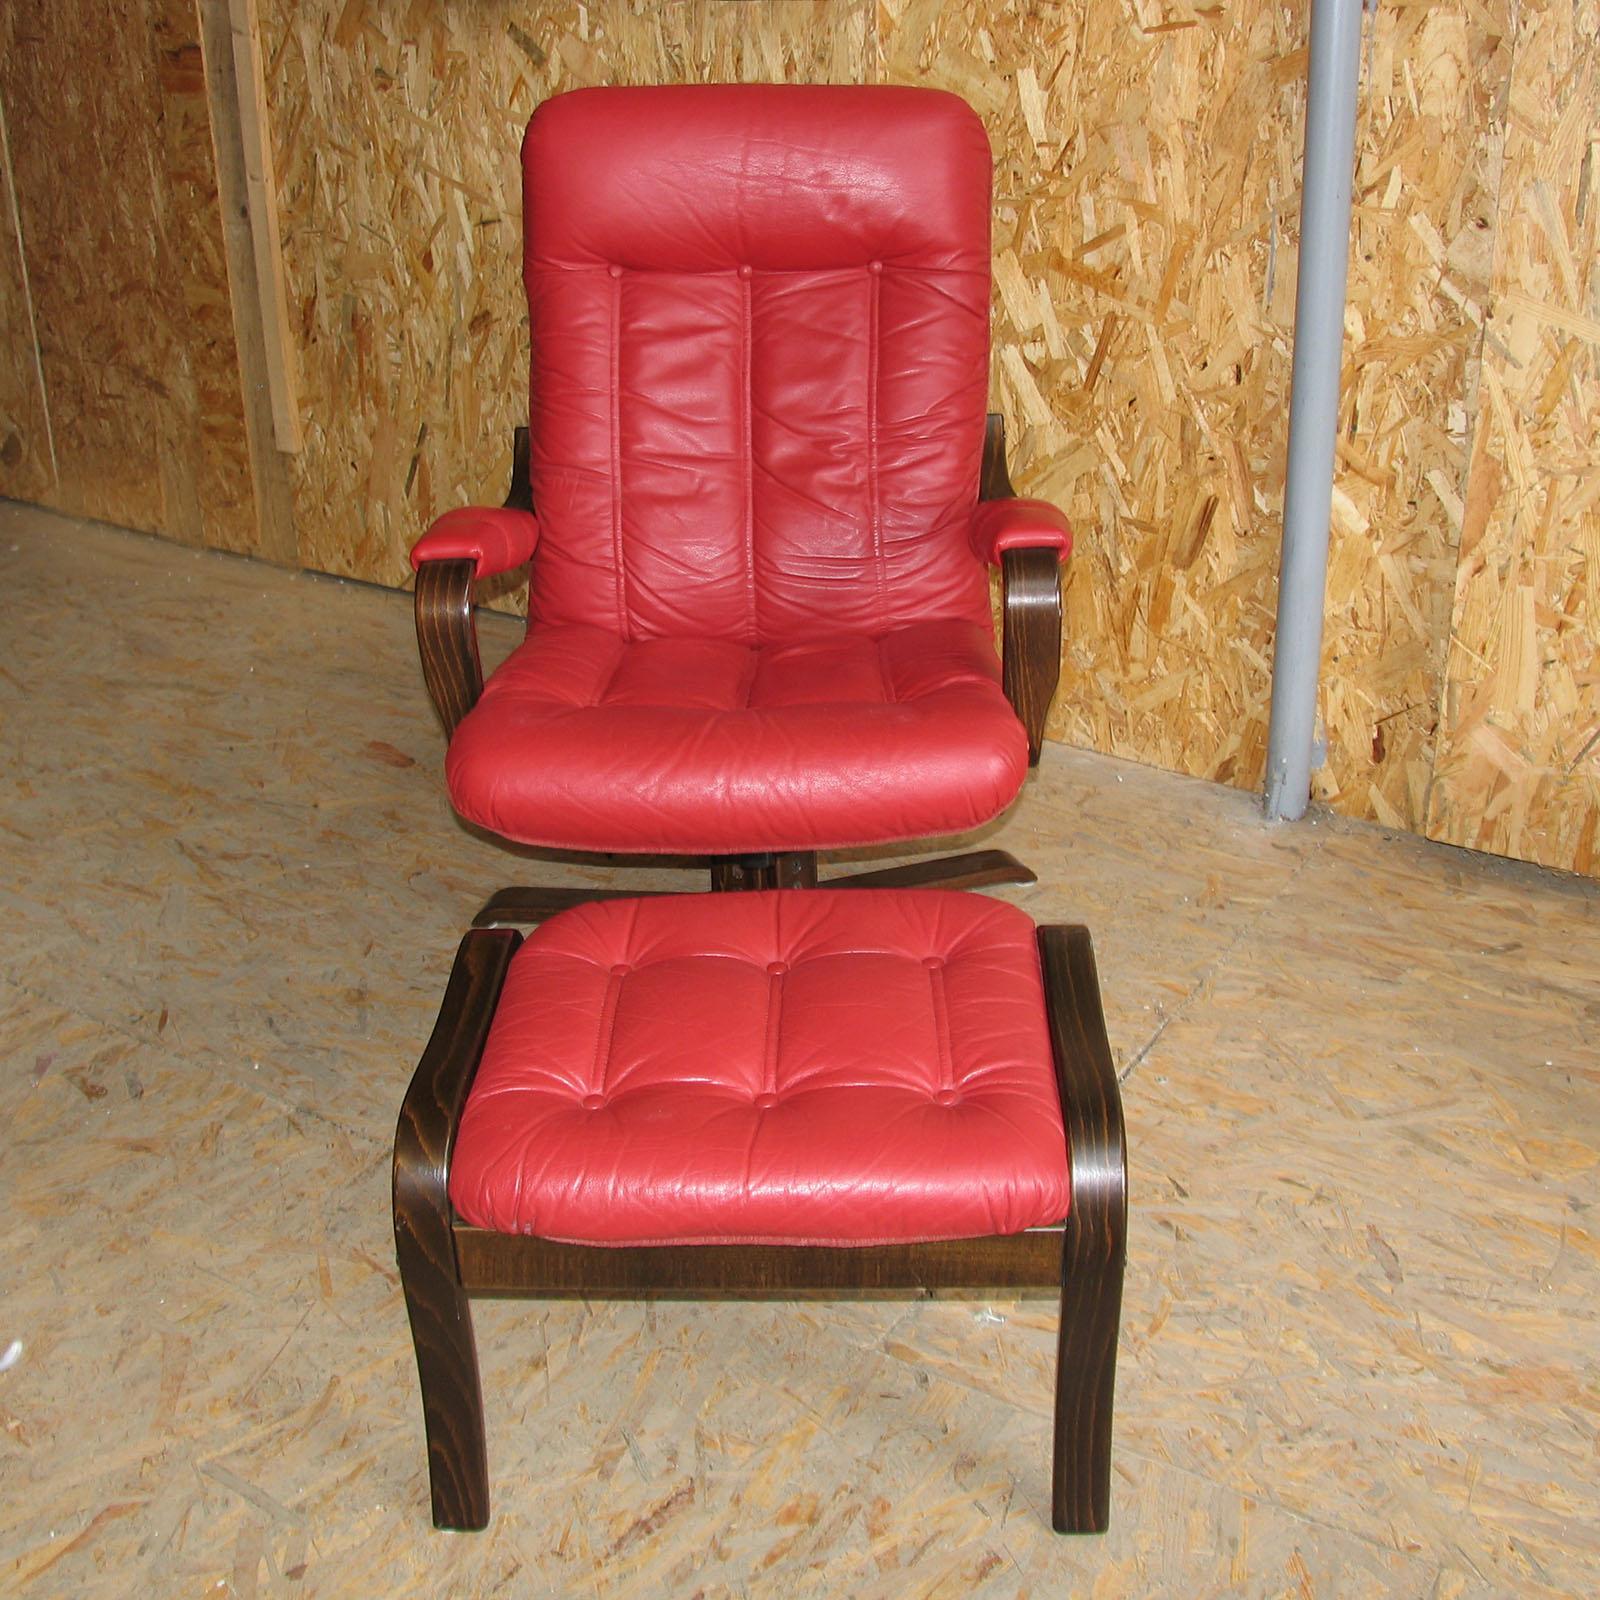 Swedish Göte Möbel Swivel Armchair with Footrest, Sweden, 1970s, 2 Sets Available For Sale